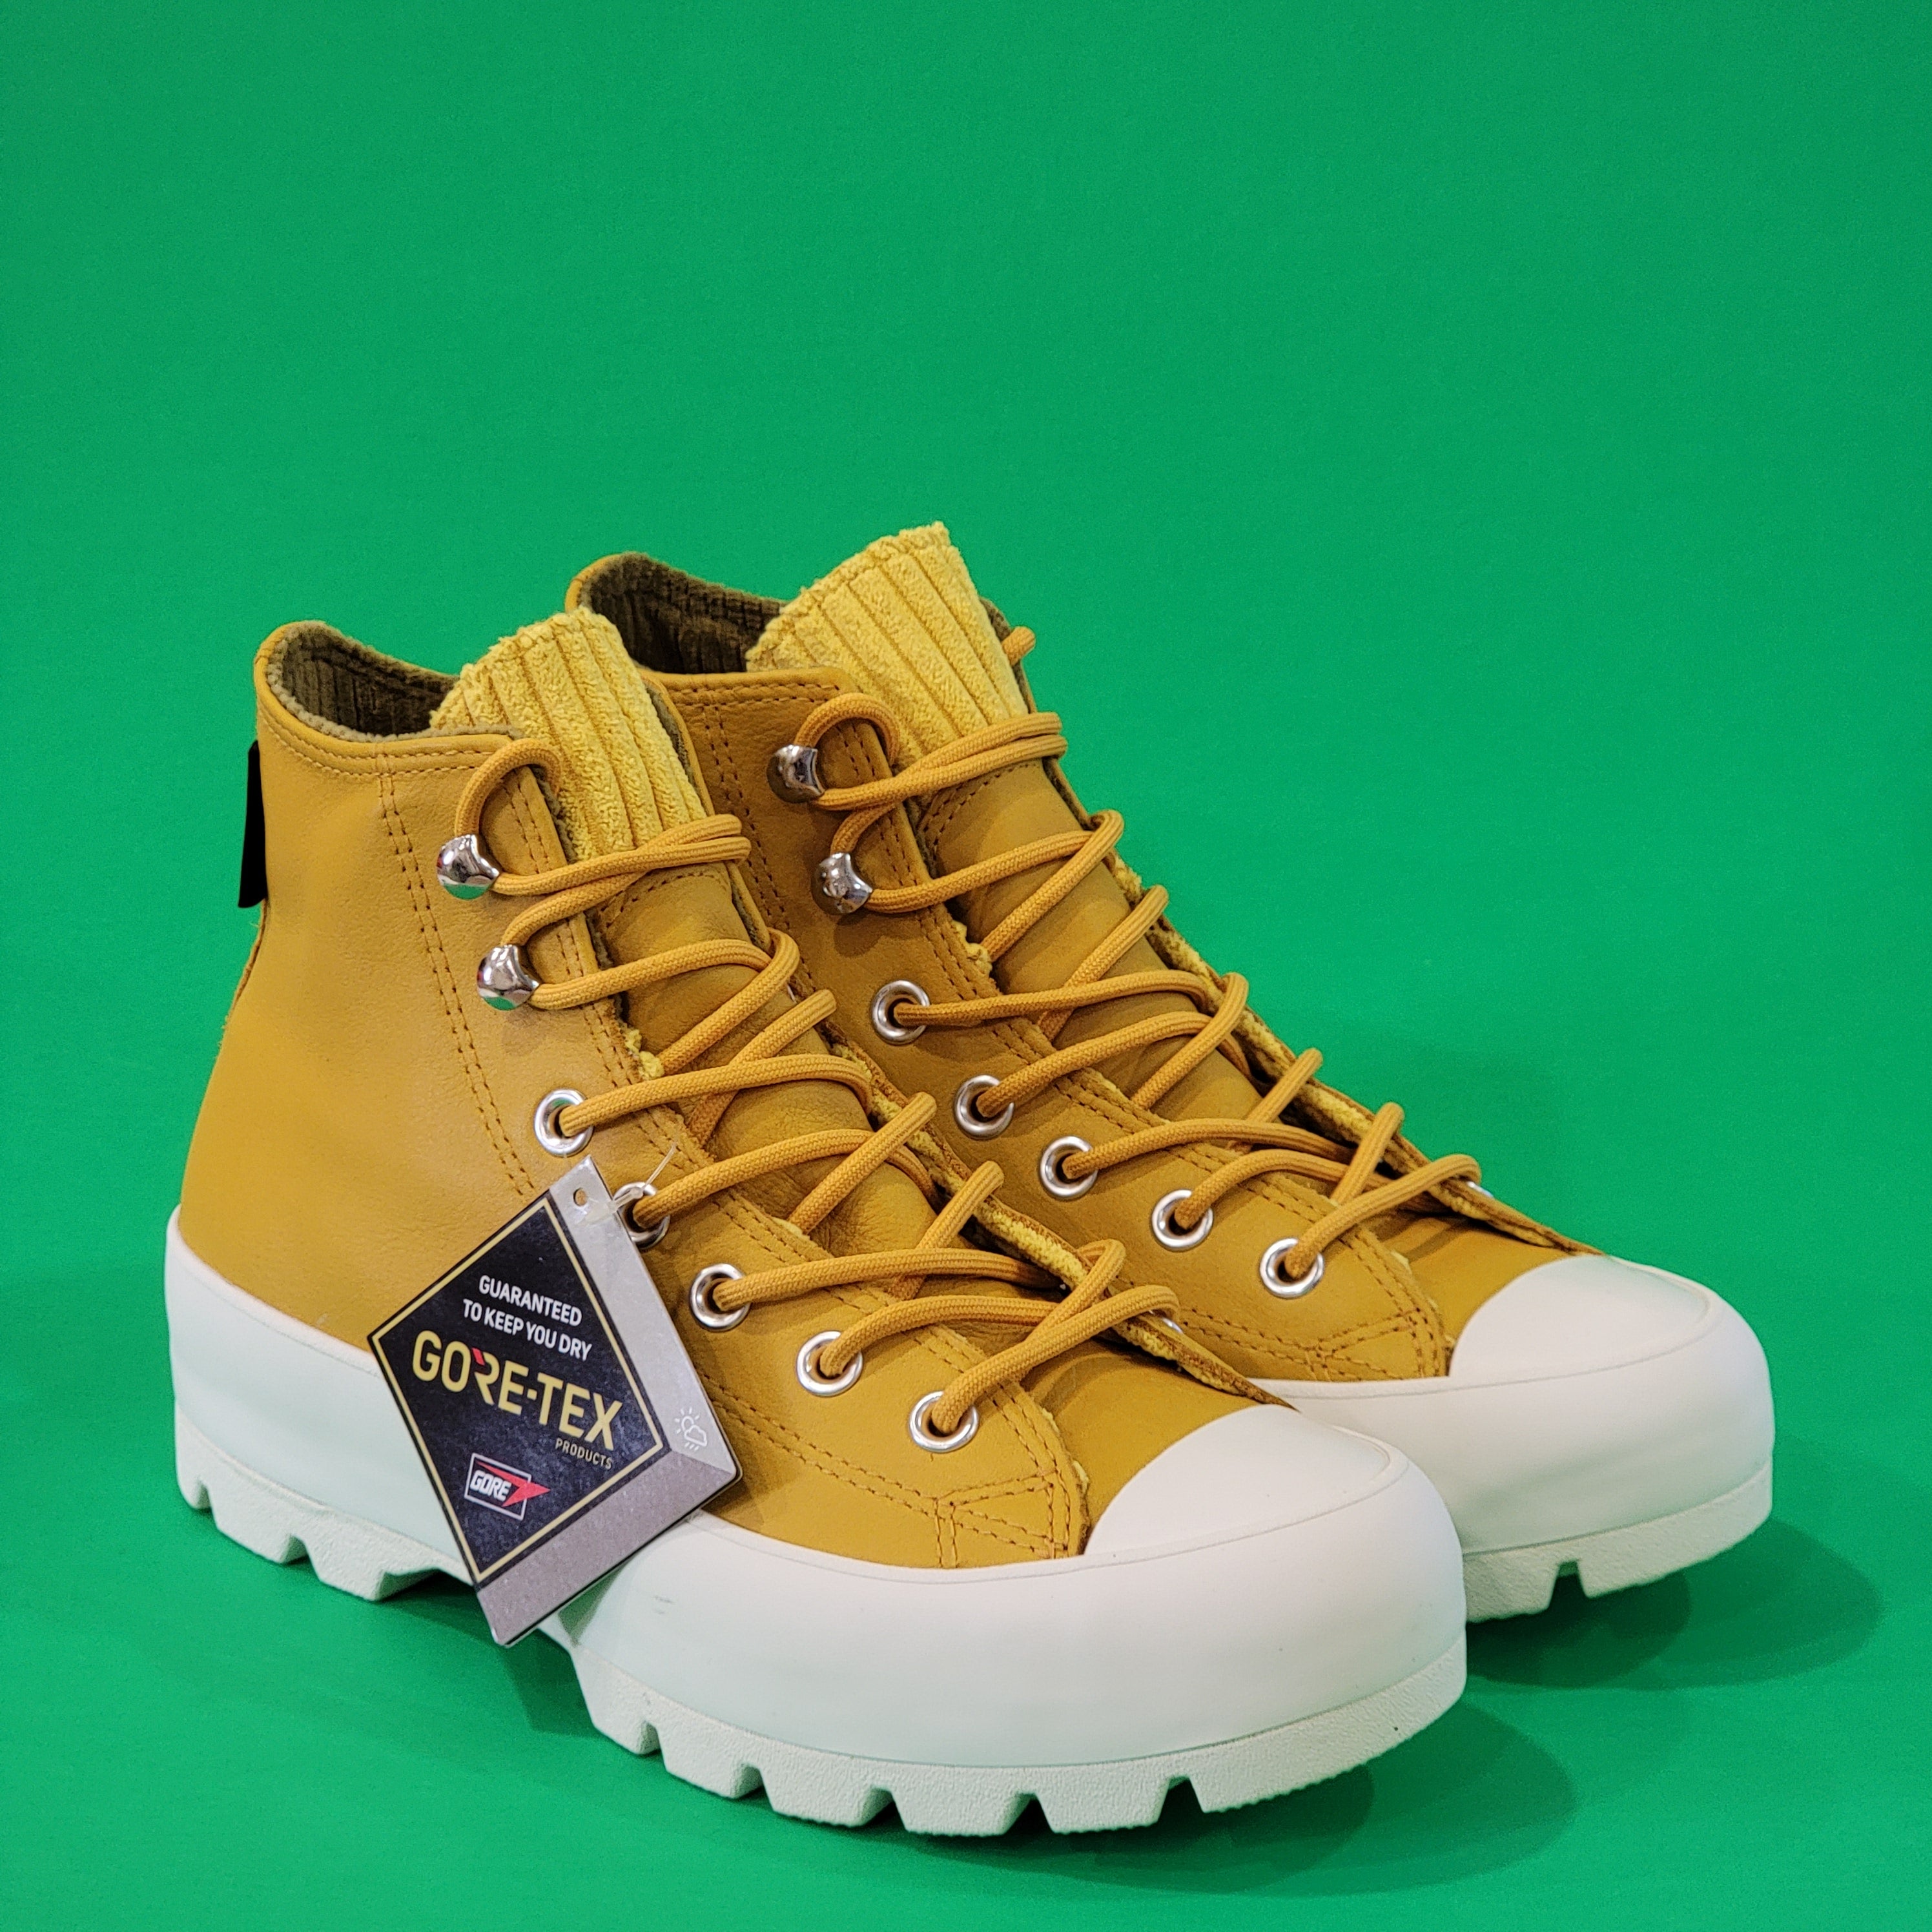 Converse CTAS Gore-Tex Waterproof Lugged Leather ‘Gold Dart’ Boots 565005C NWT